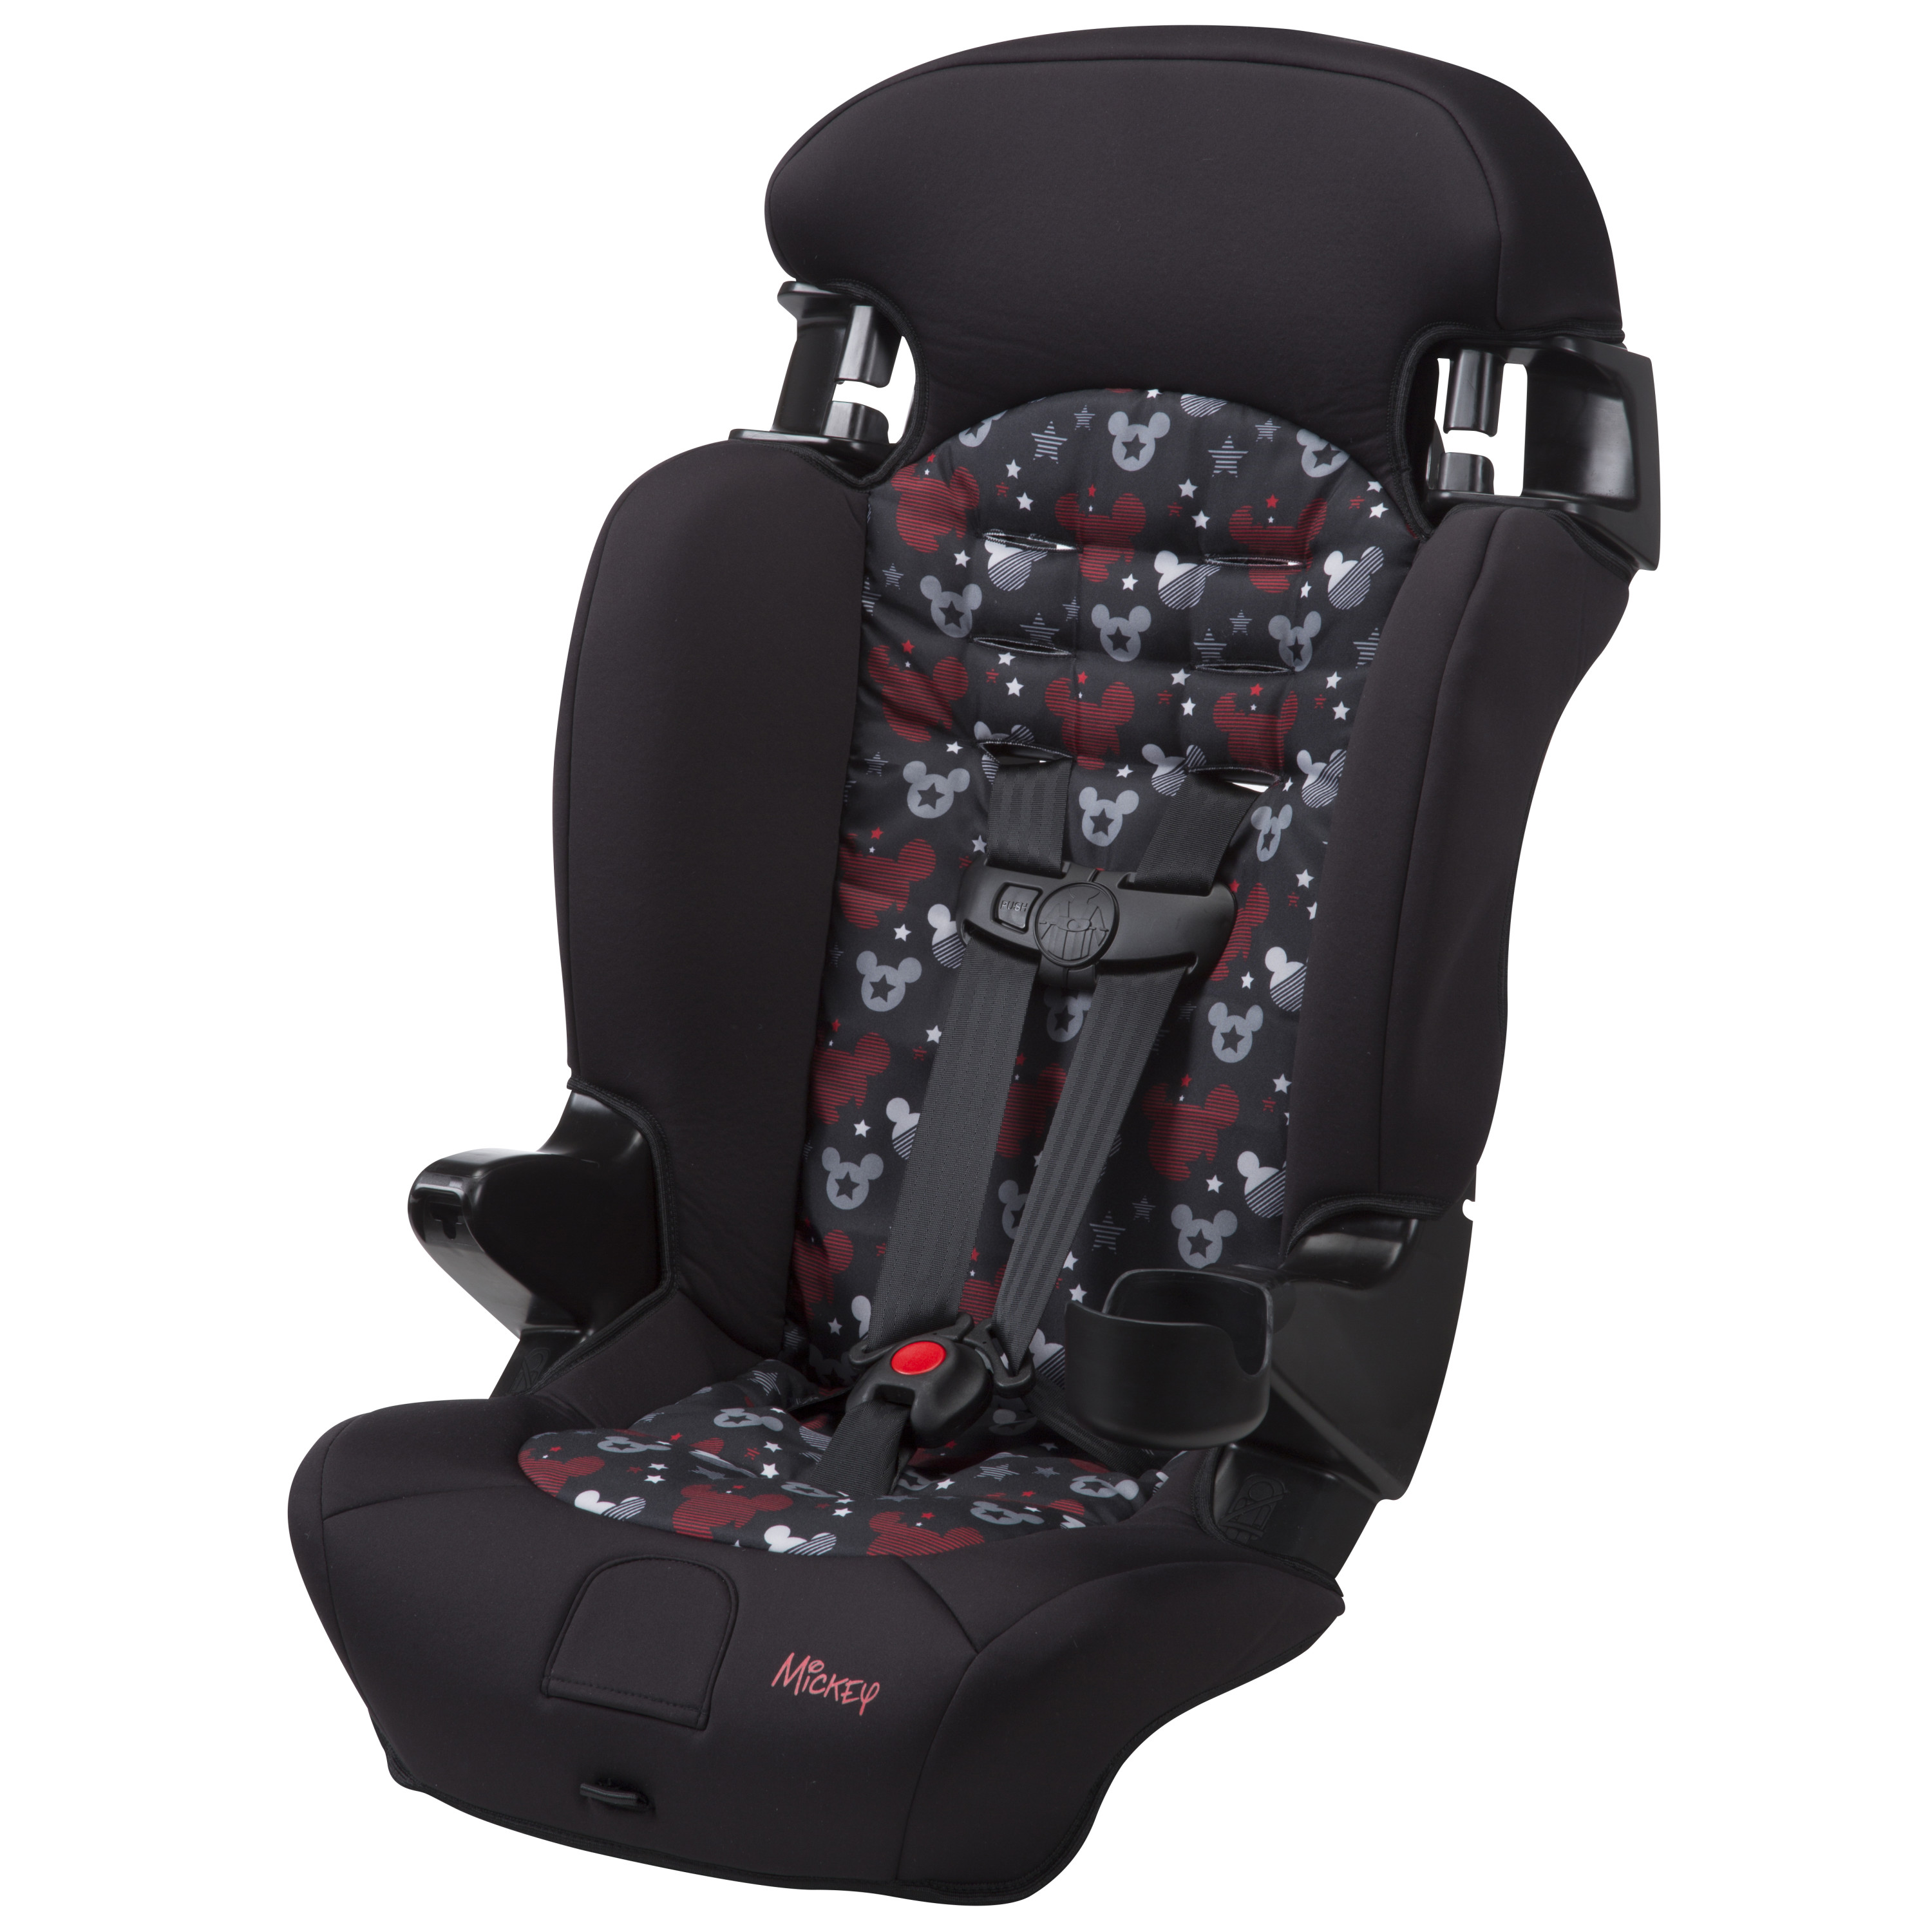 Disney Baby Finale 2-in-1 Booster Car Seat, Outta This World - image 1 of 14